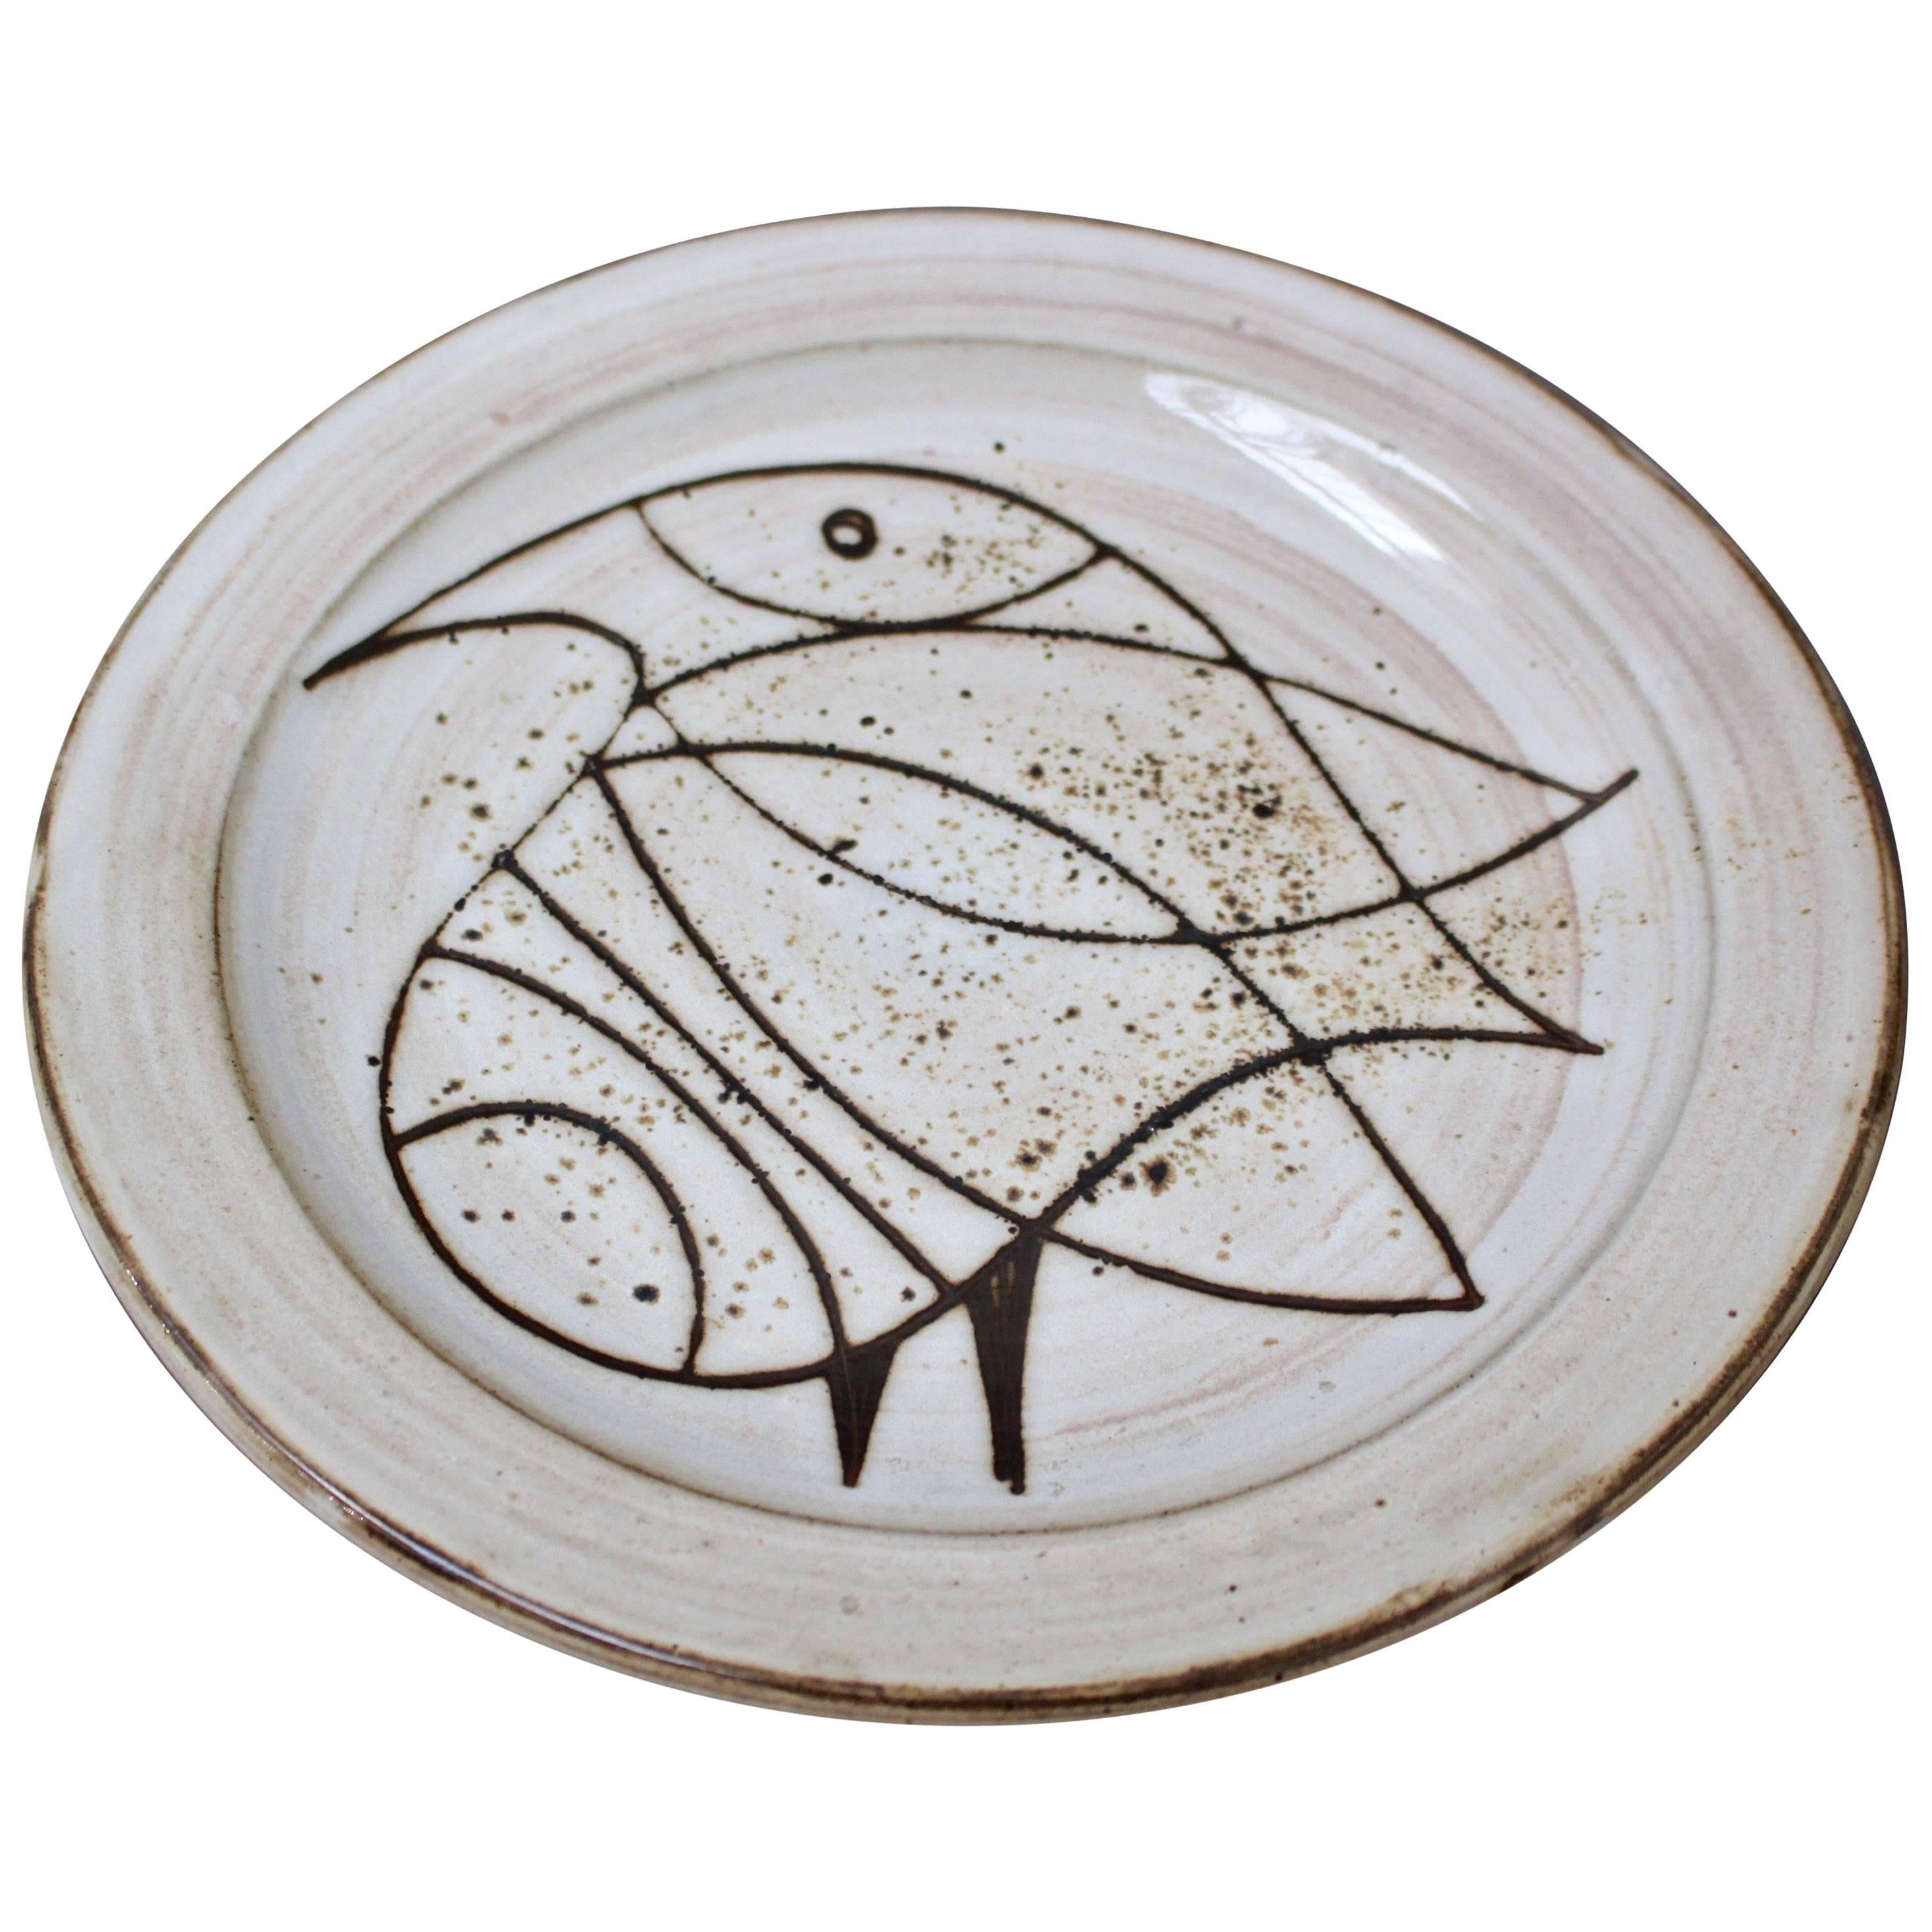 Mid-century Ceramic Plate with Stylised Bird by Jacques Pouchain, circa 1950s